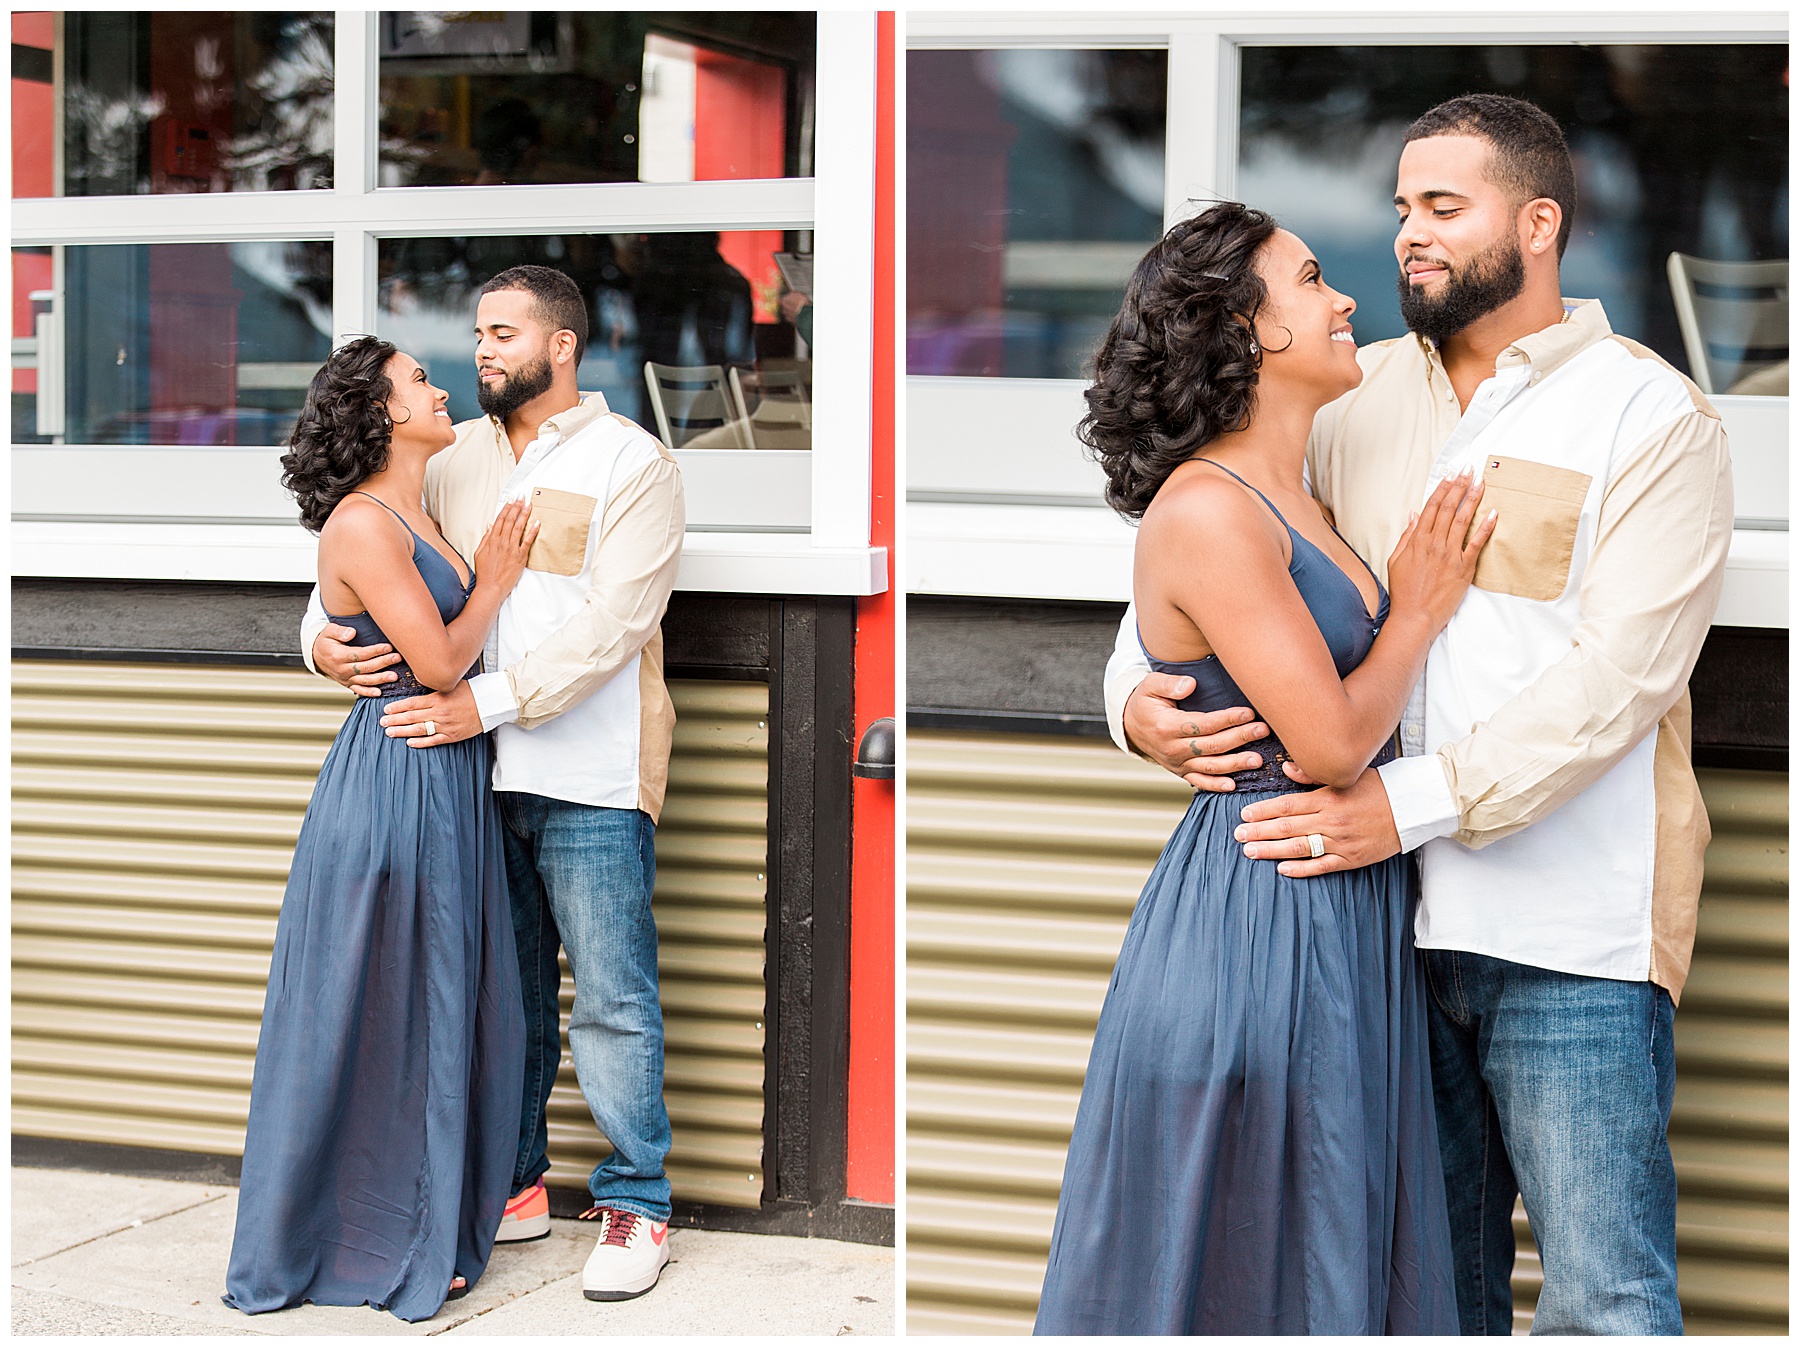 Engagement photography in Peekskill, New York